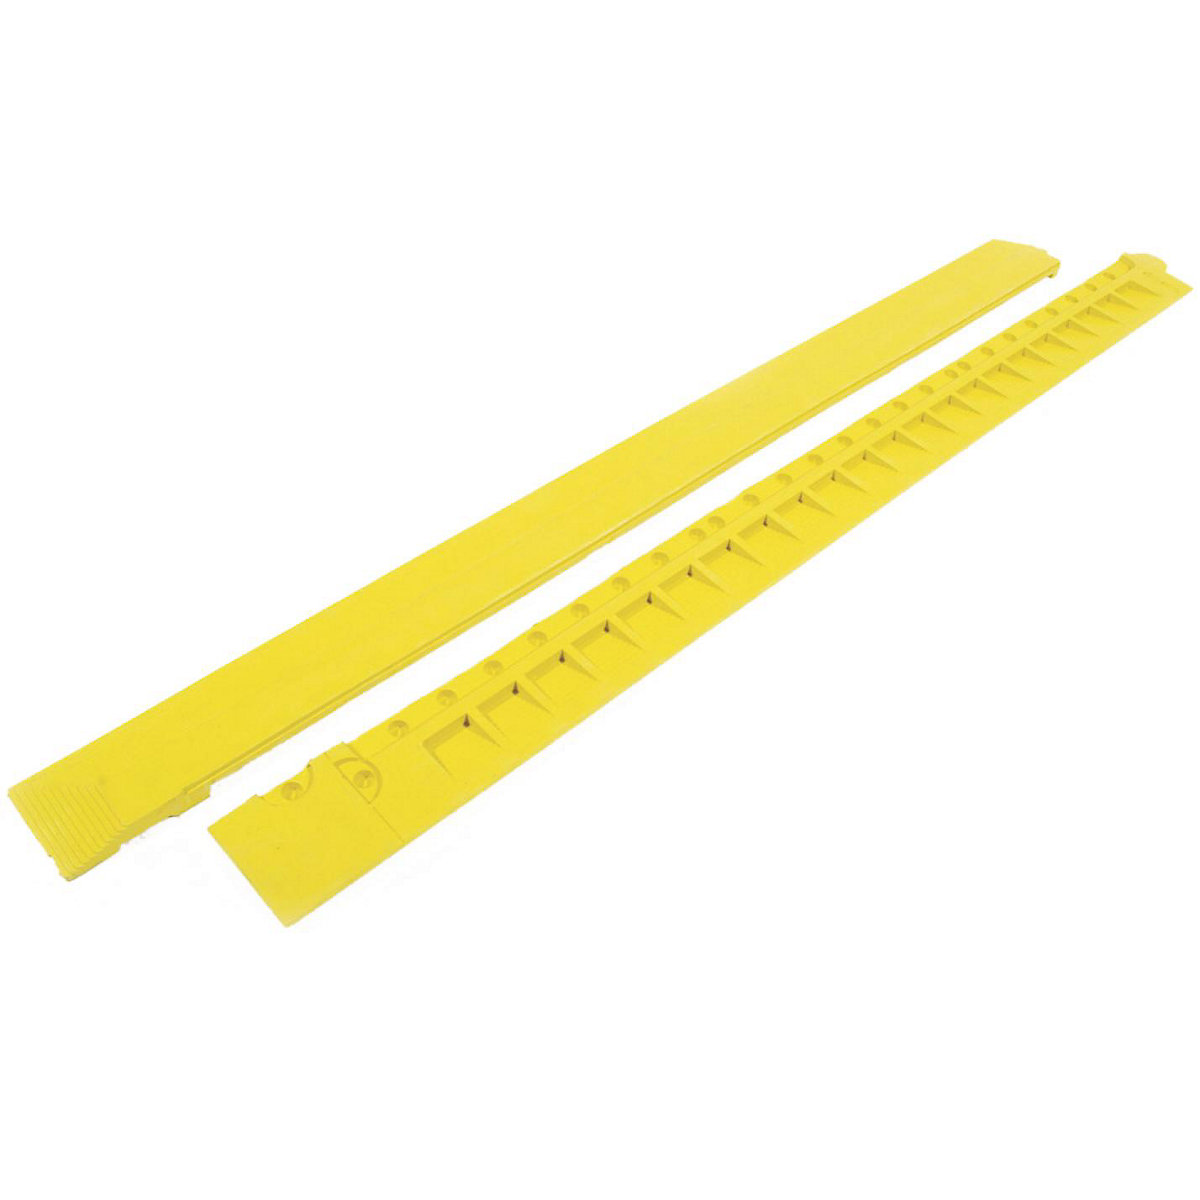 Ramp edge, yellow – COBA, made of nitrile rubber, length 900 mm, with recesses-3